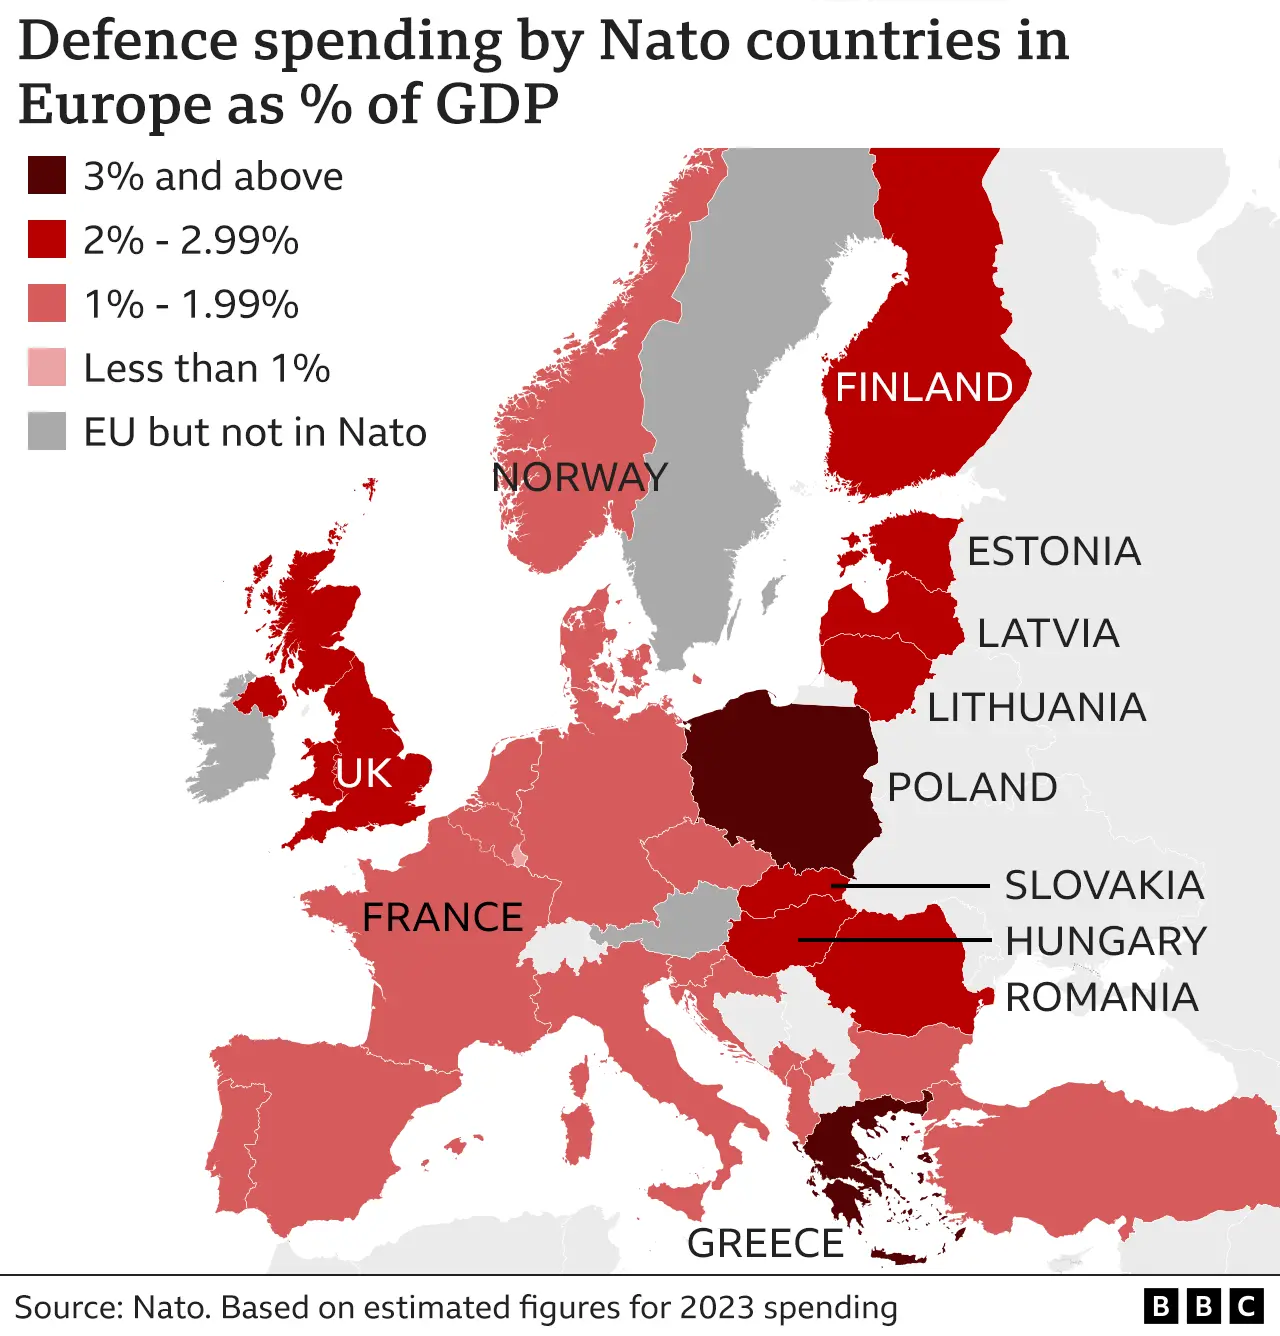 How much do Nato members spend on defence?